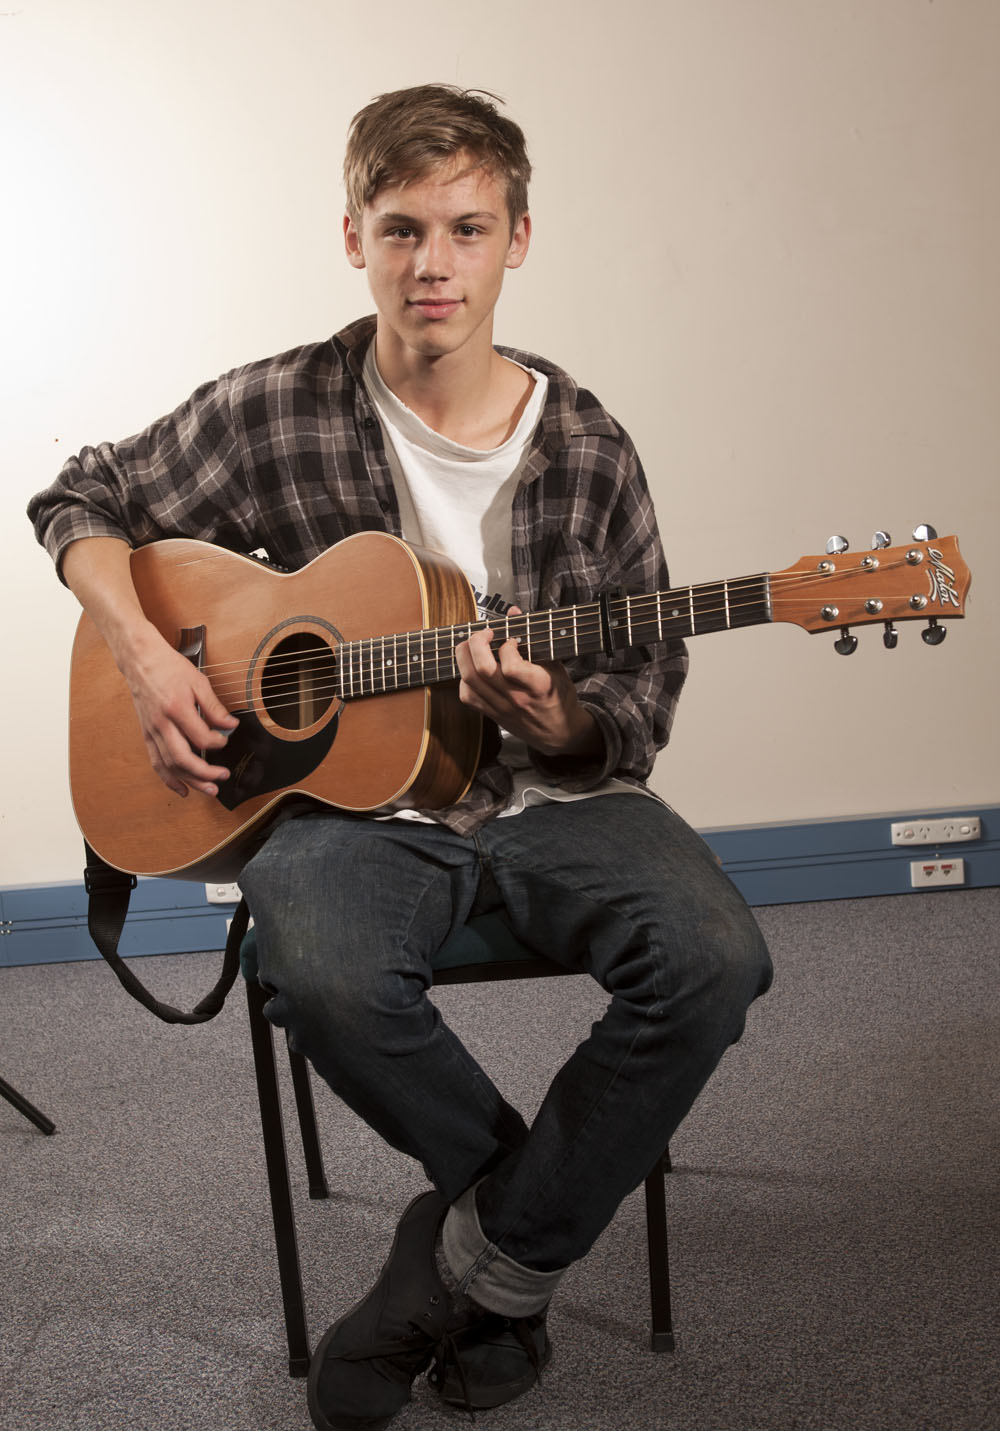 Ash Graham 16 year old singer songwriter who is one of the performers for NZ Music Month.